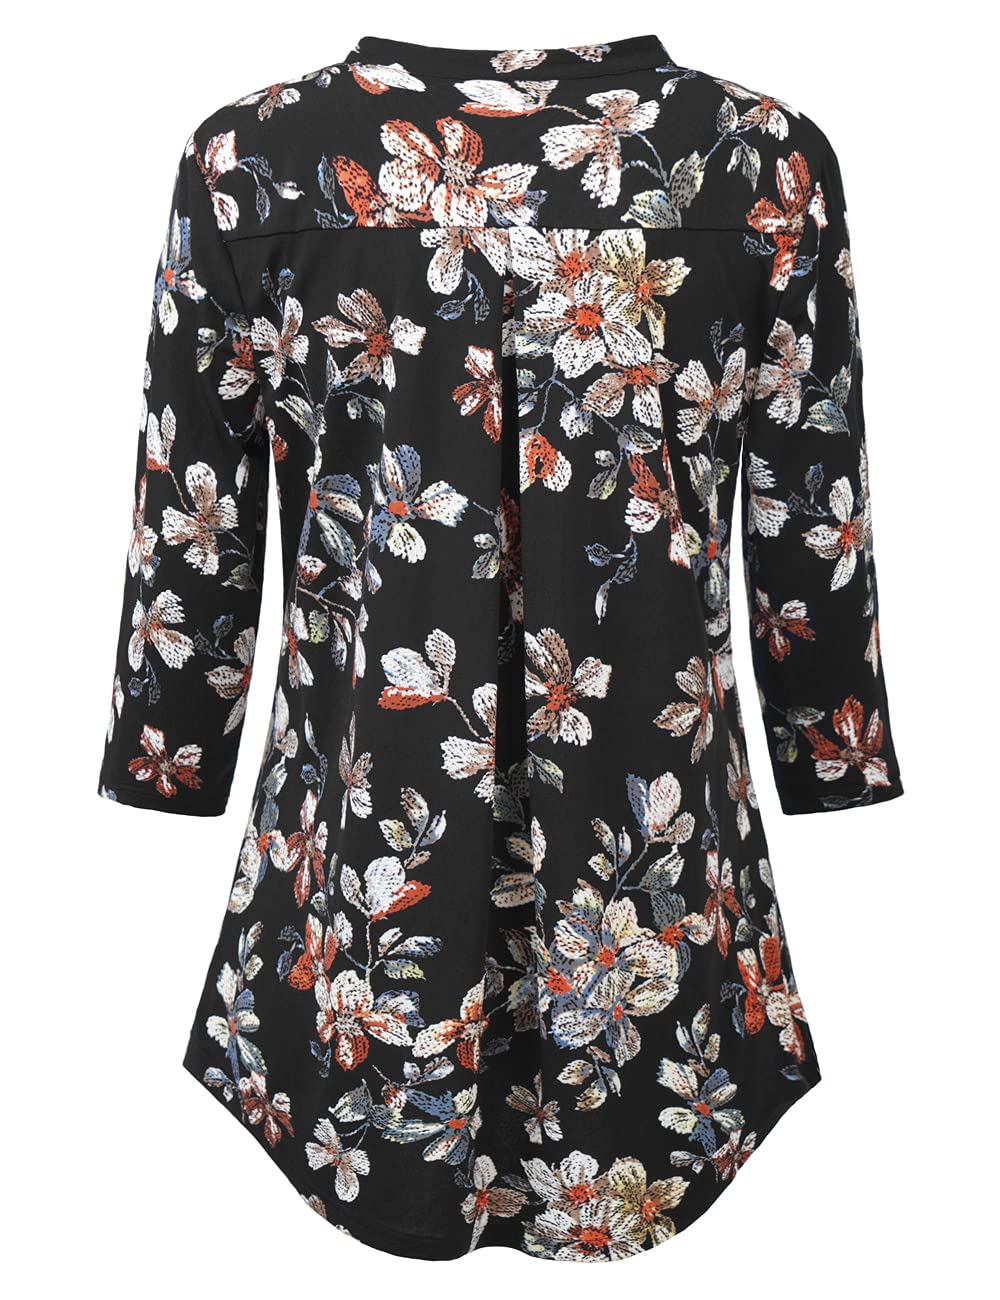 BAISHENGGT Black Floral Womens 3/4 Sleeve Floral Printed Notch V Neck Blouses Tunics Tops